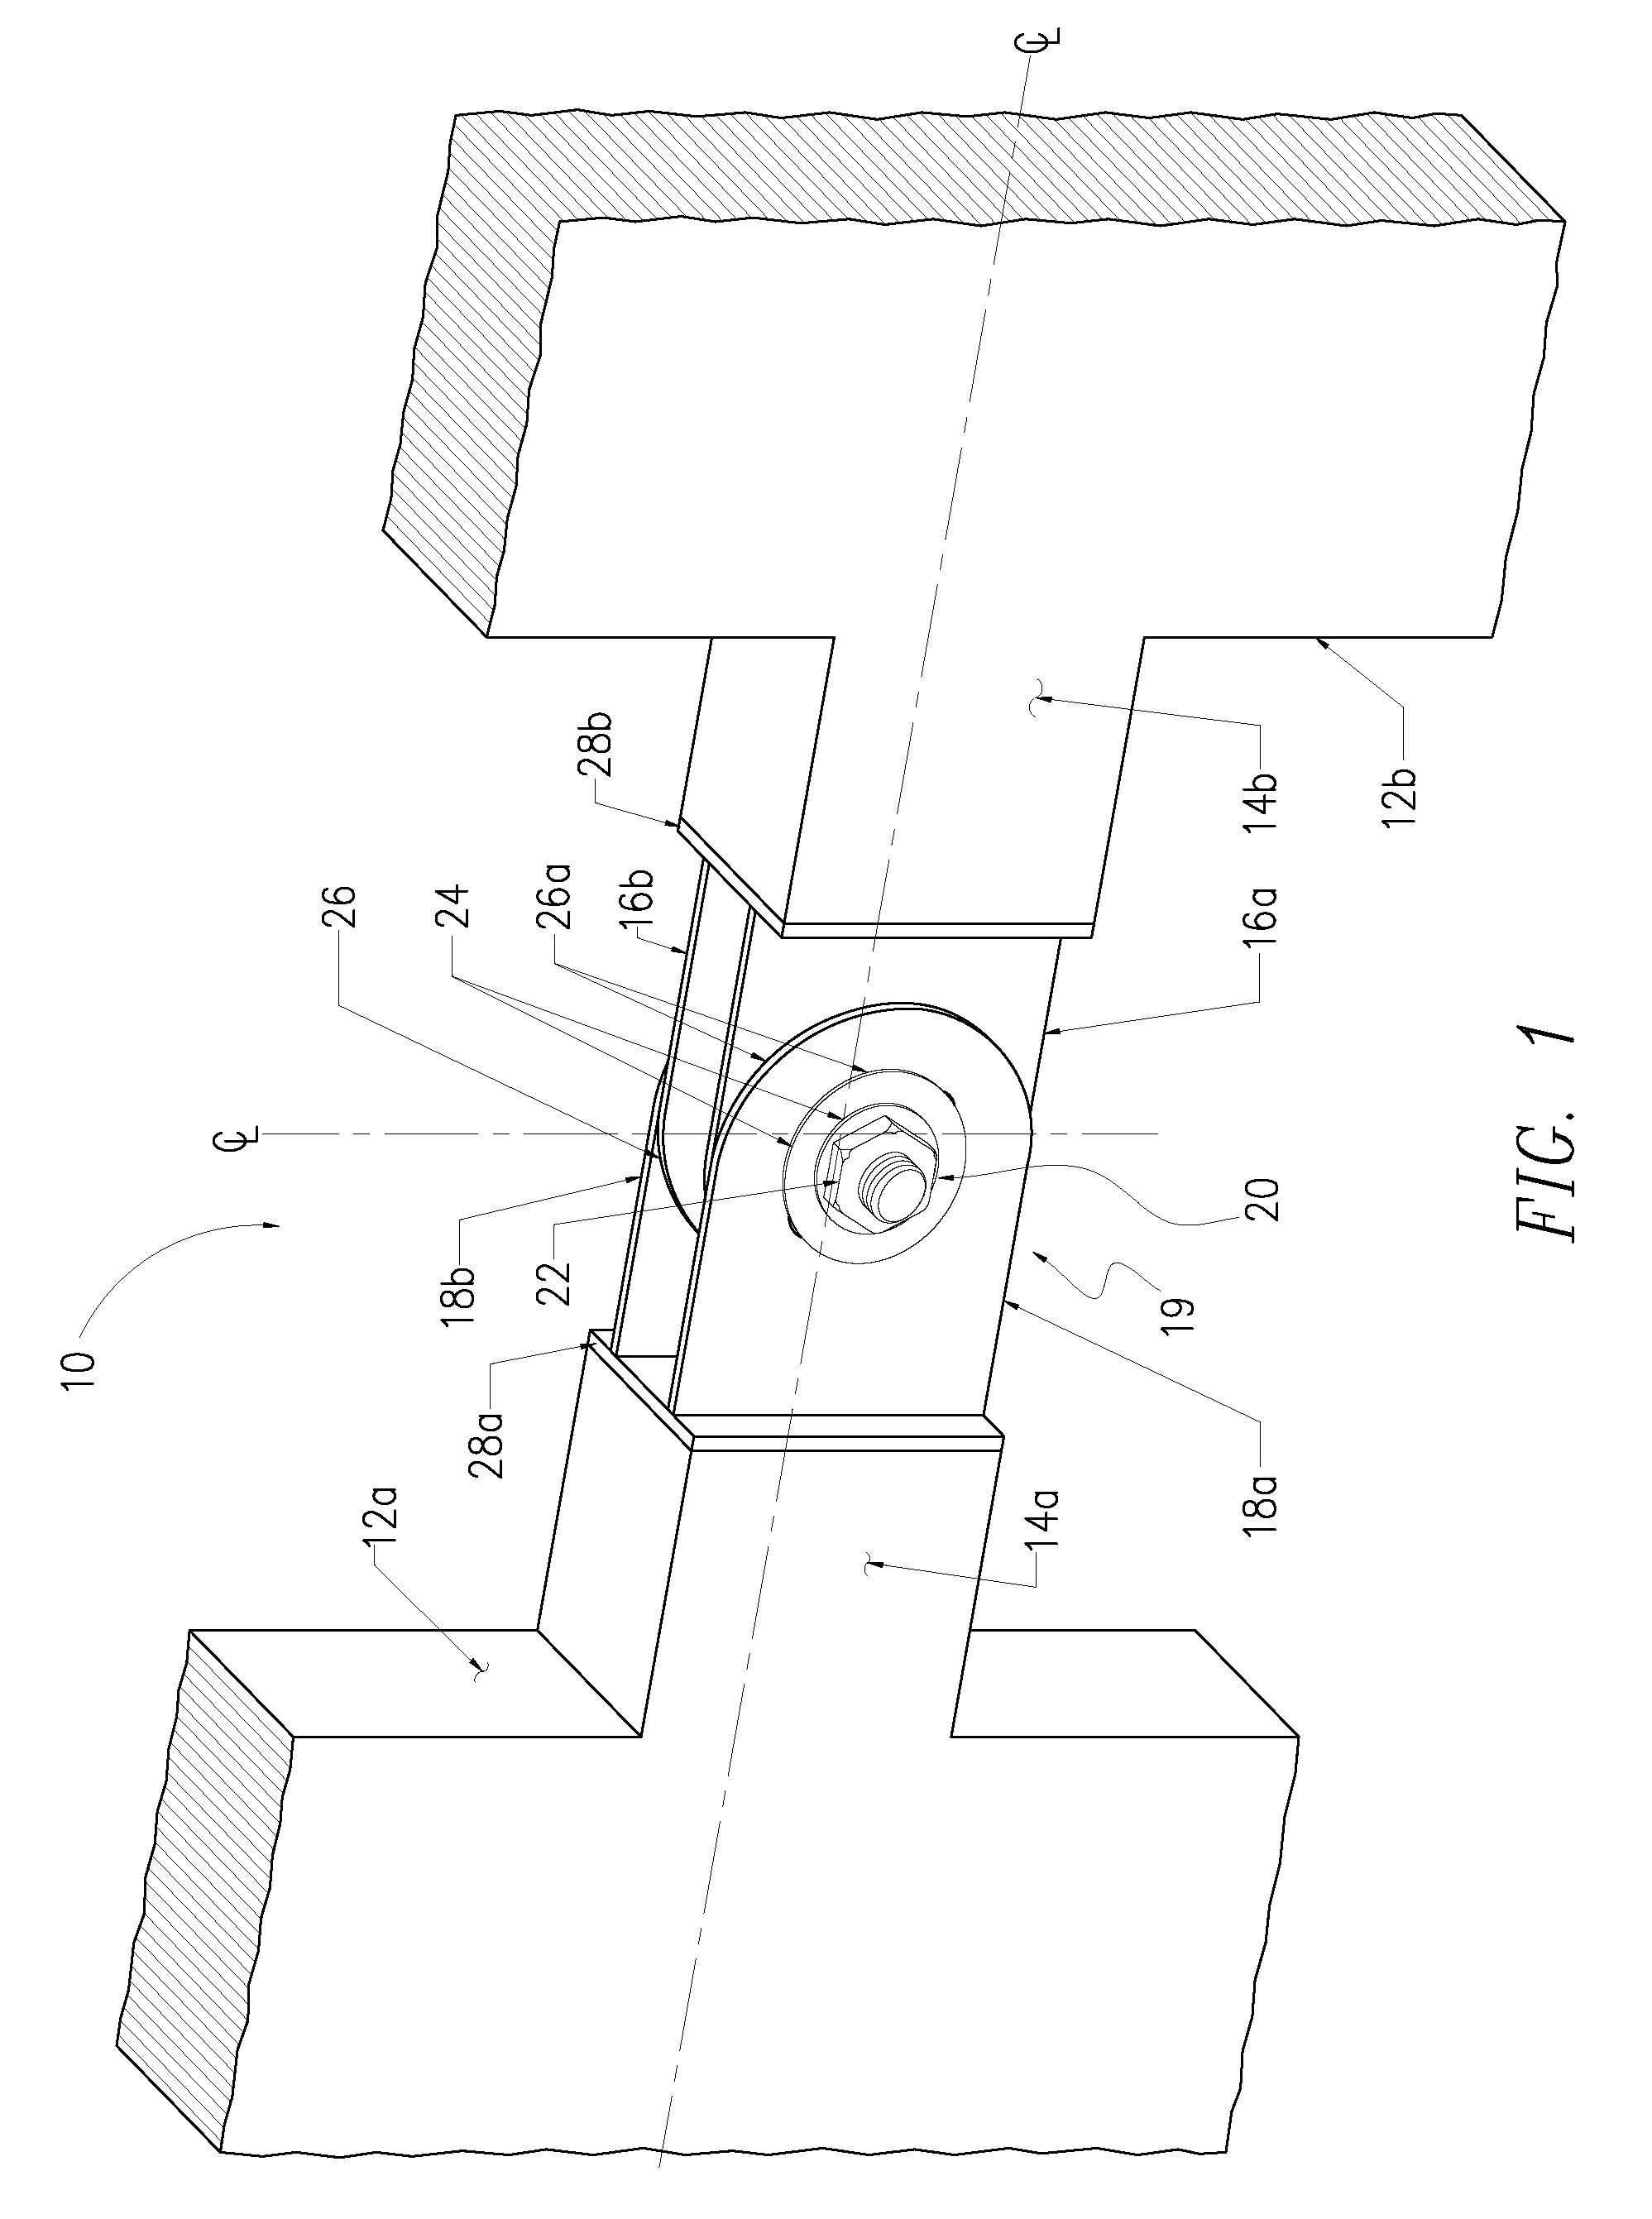 Seismic structural device